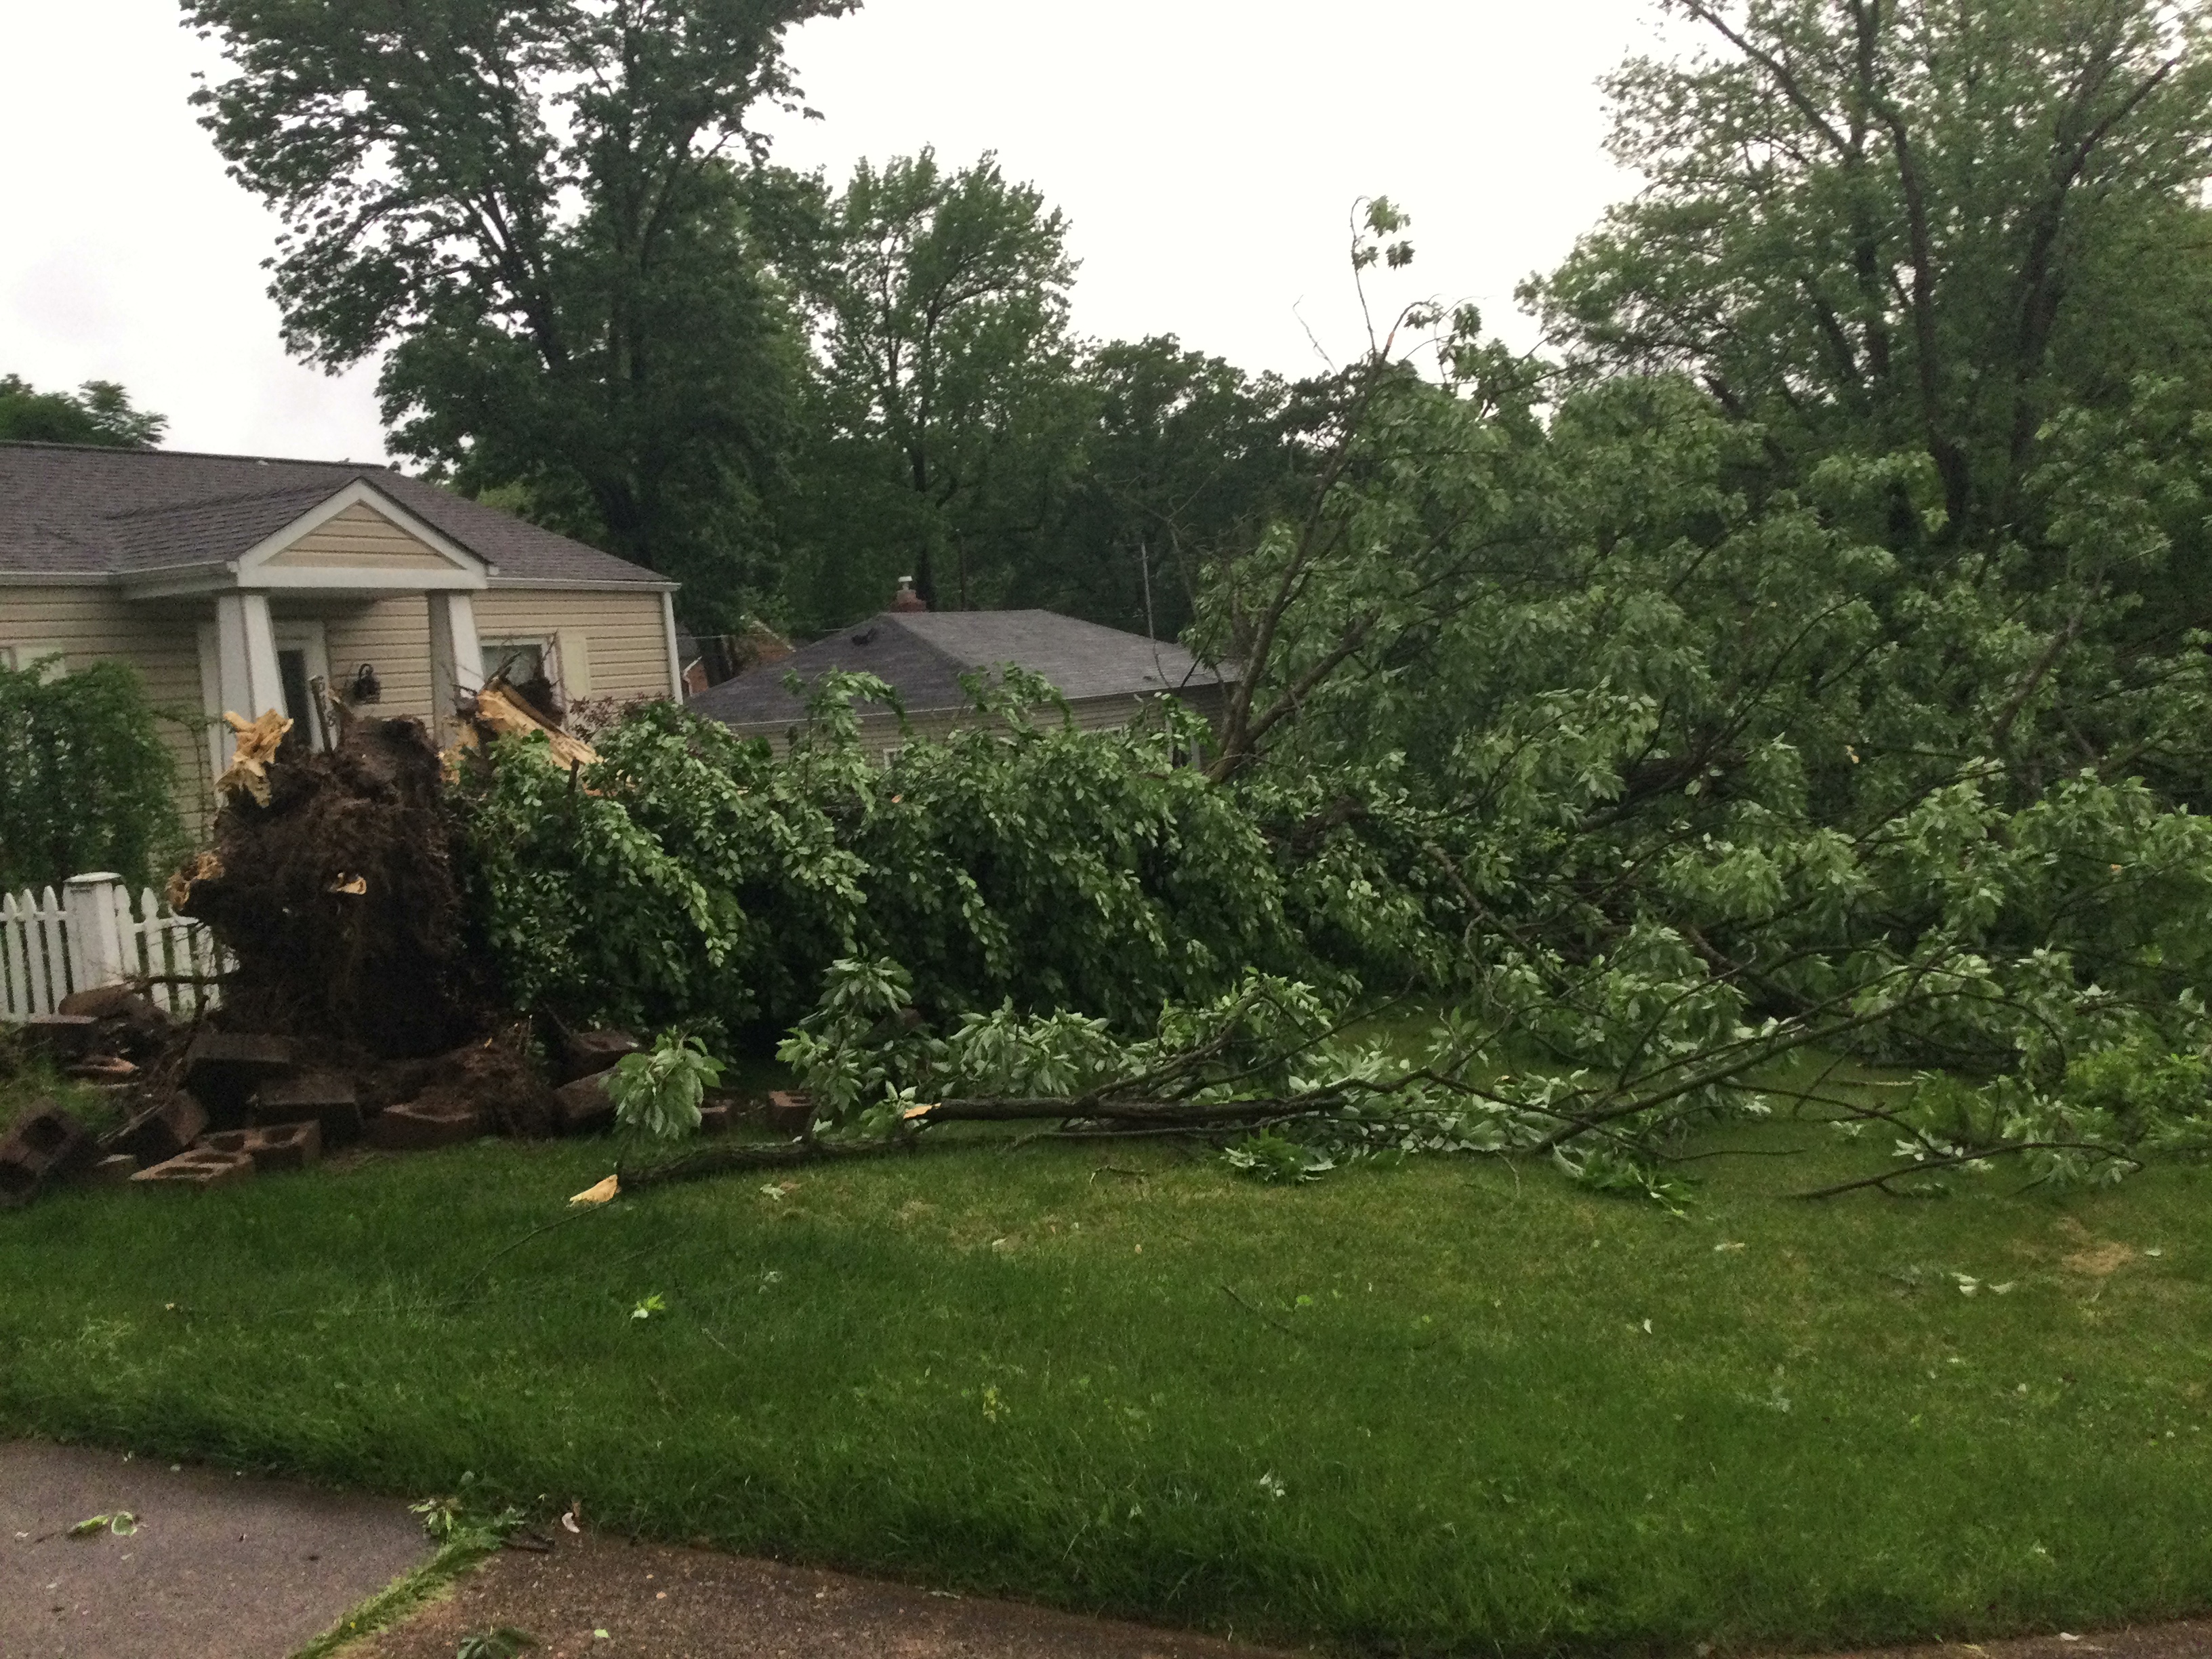 An uprooted tree in front of a house in Glendale.